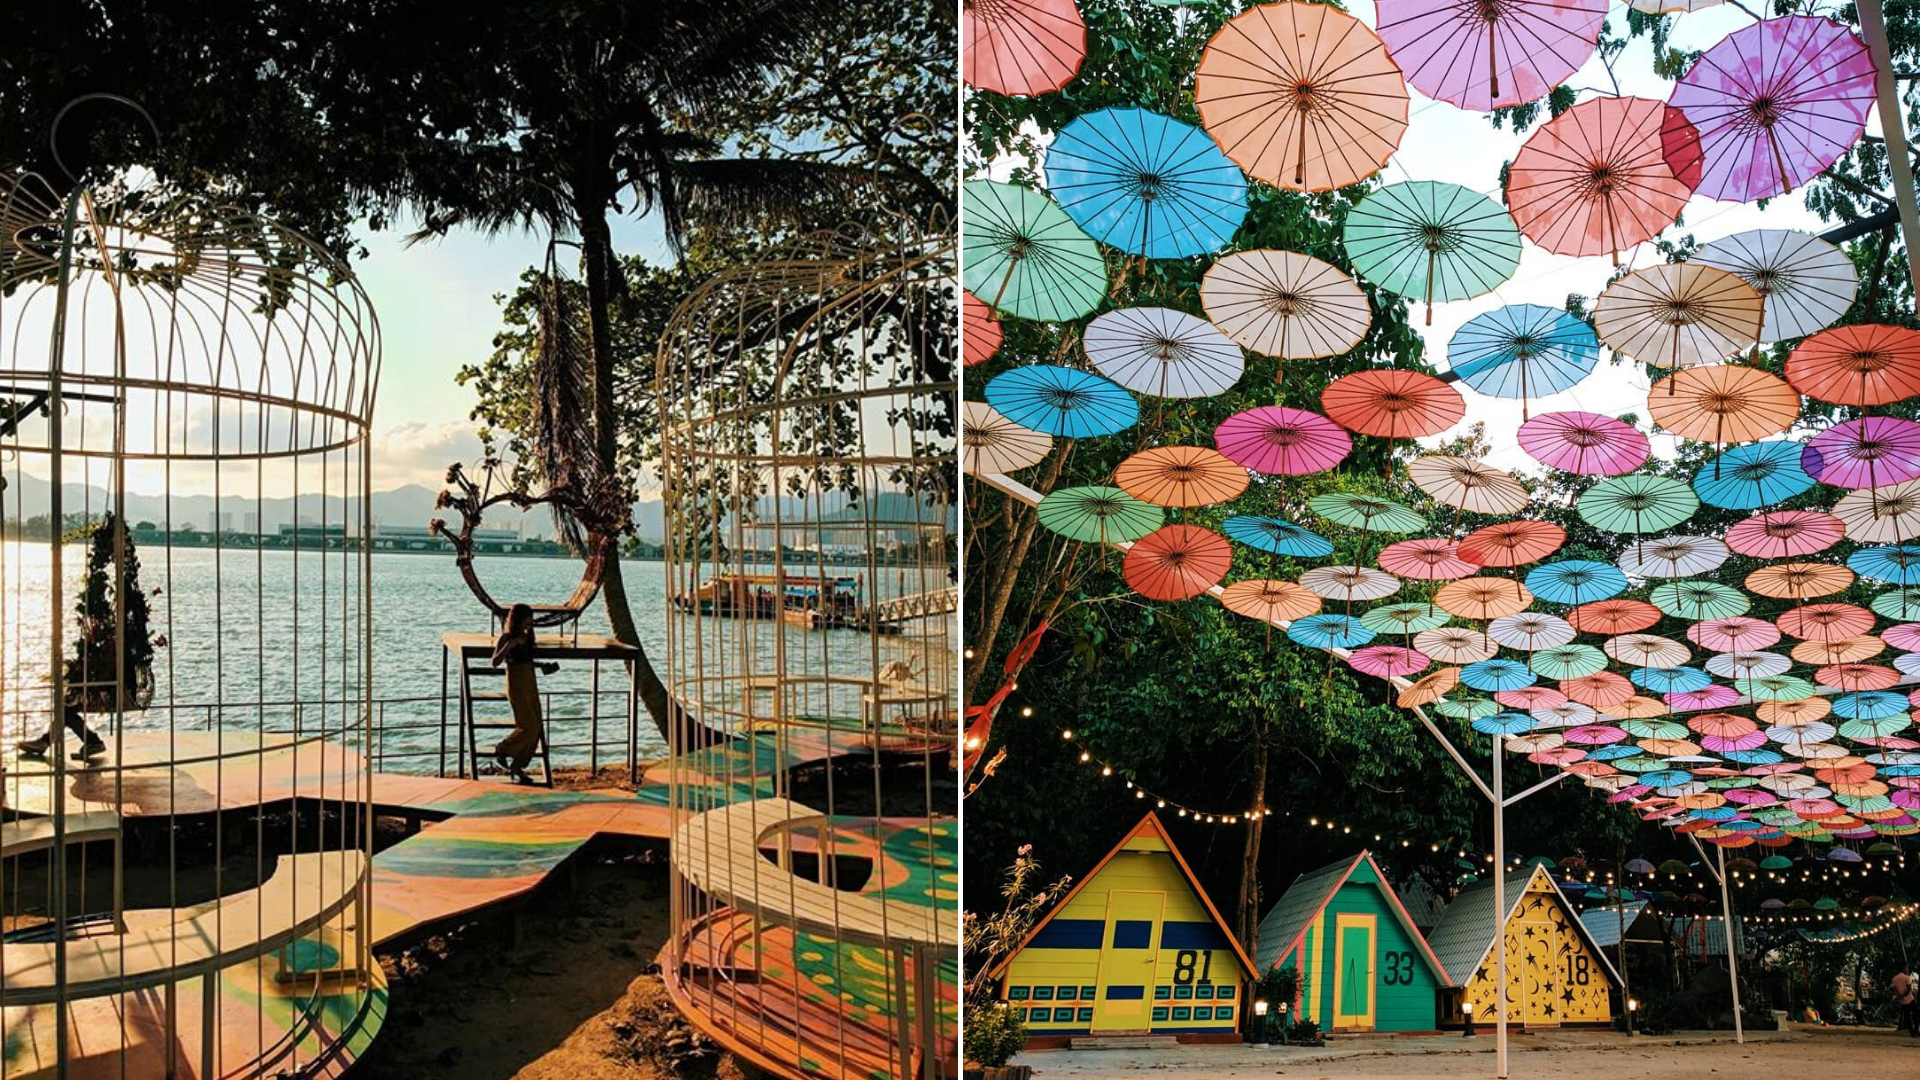 Pulau Jerejak Is A Colorful Hidden Gem Just 10 Minutes Away from Penang